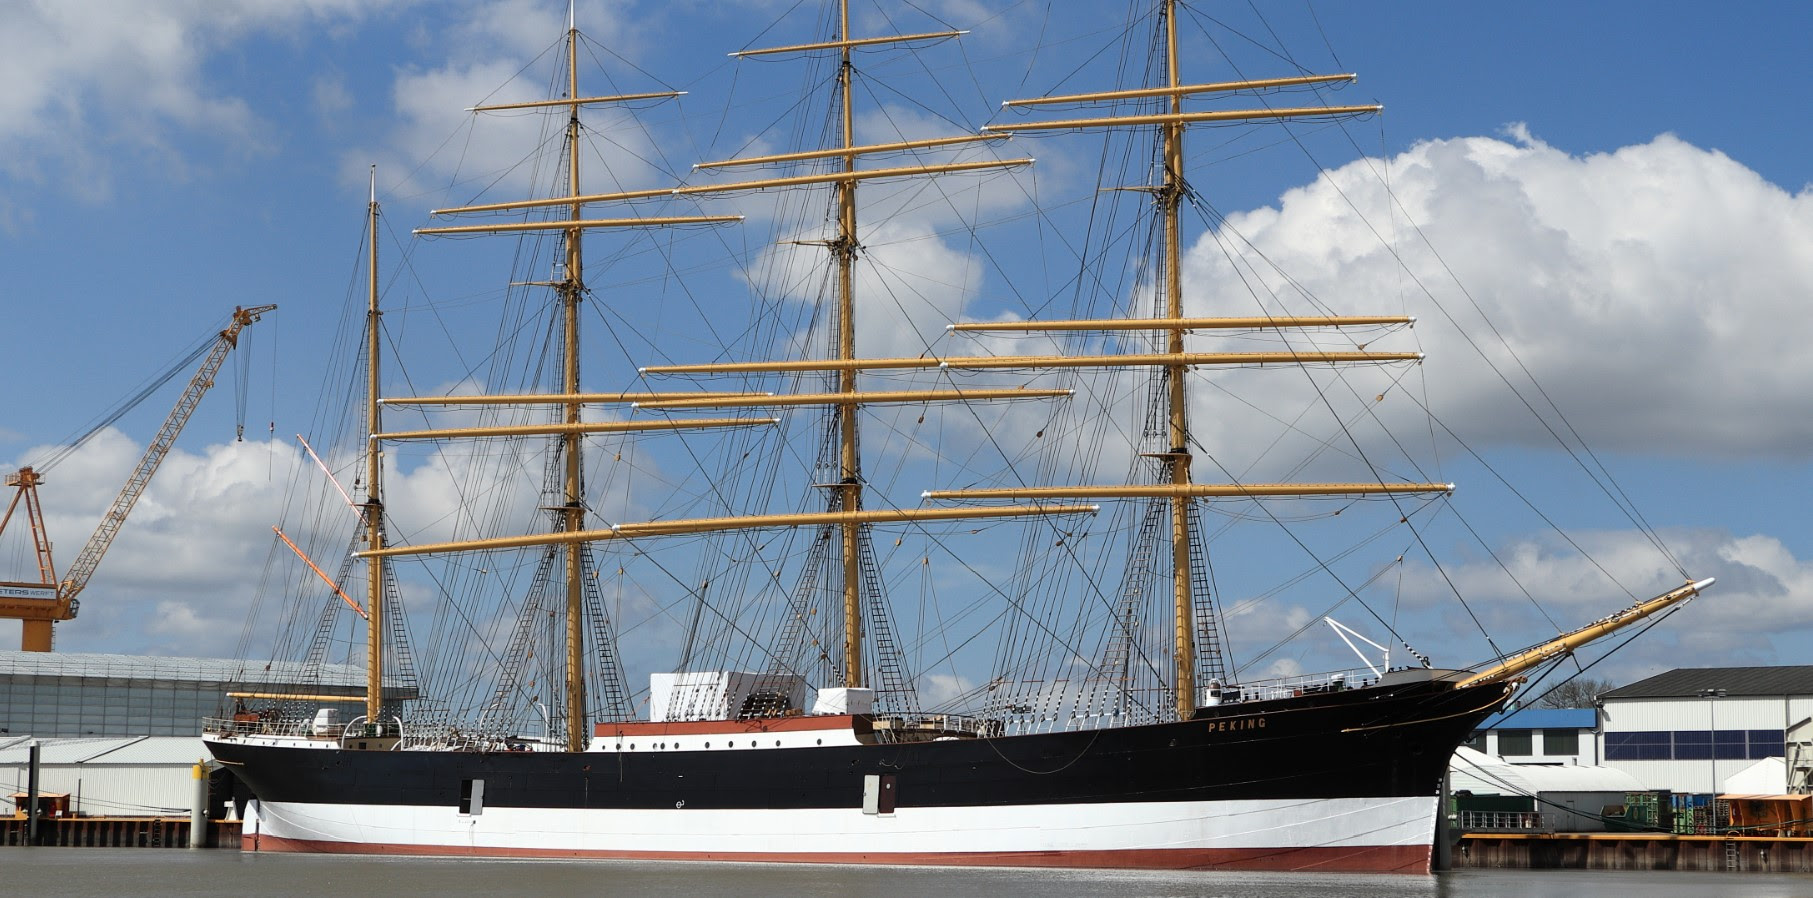 After - The Peking restoration marks one of the most prestigious projects for Nippon Paint Marine, which coated all internal and external areas of the historic barque